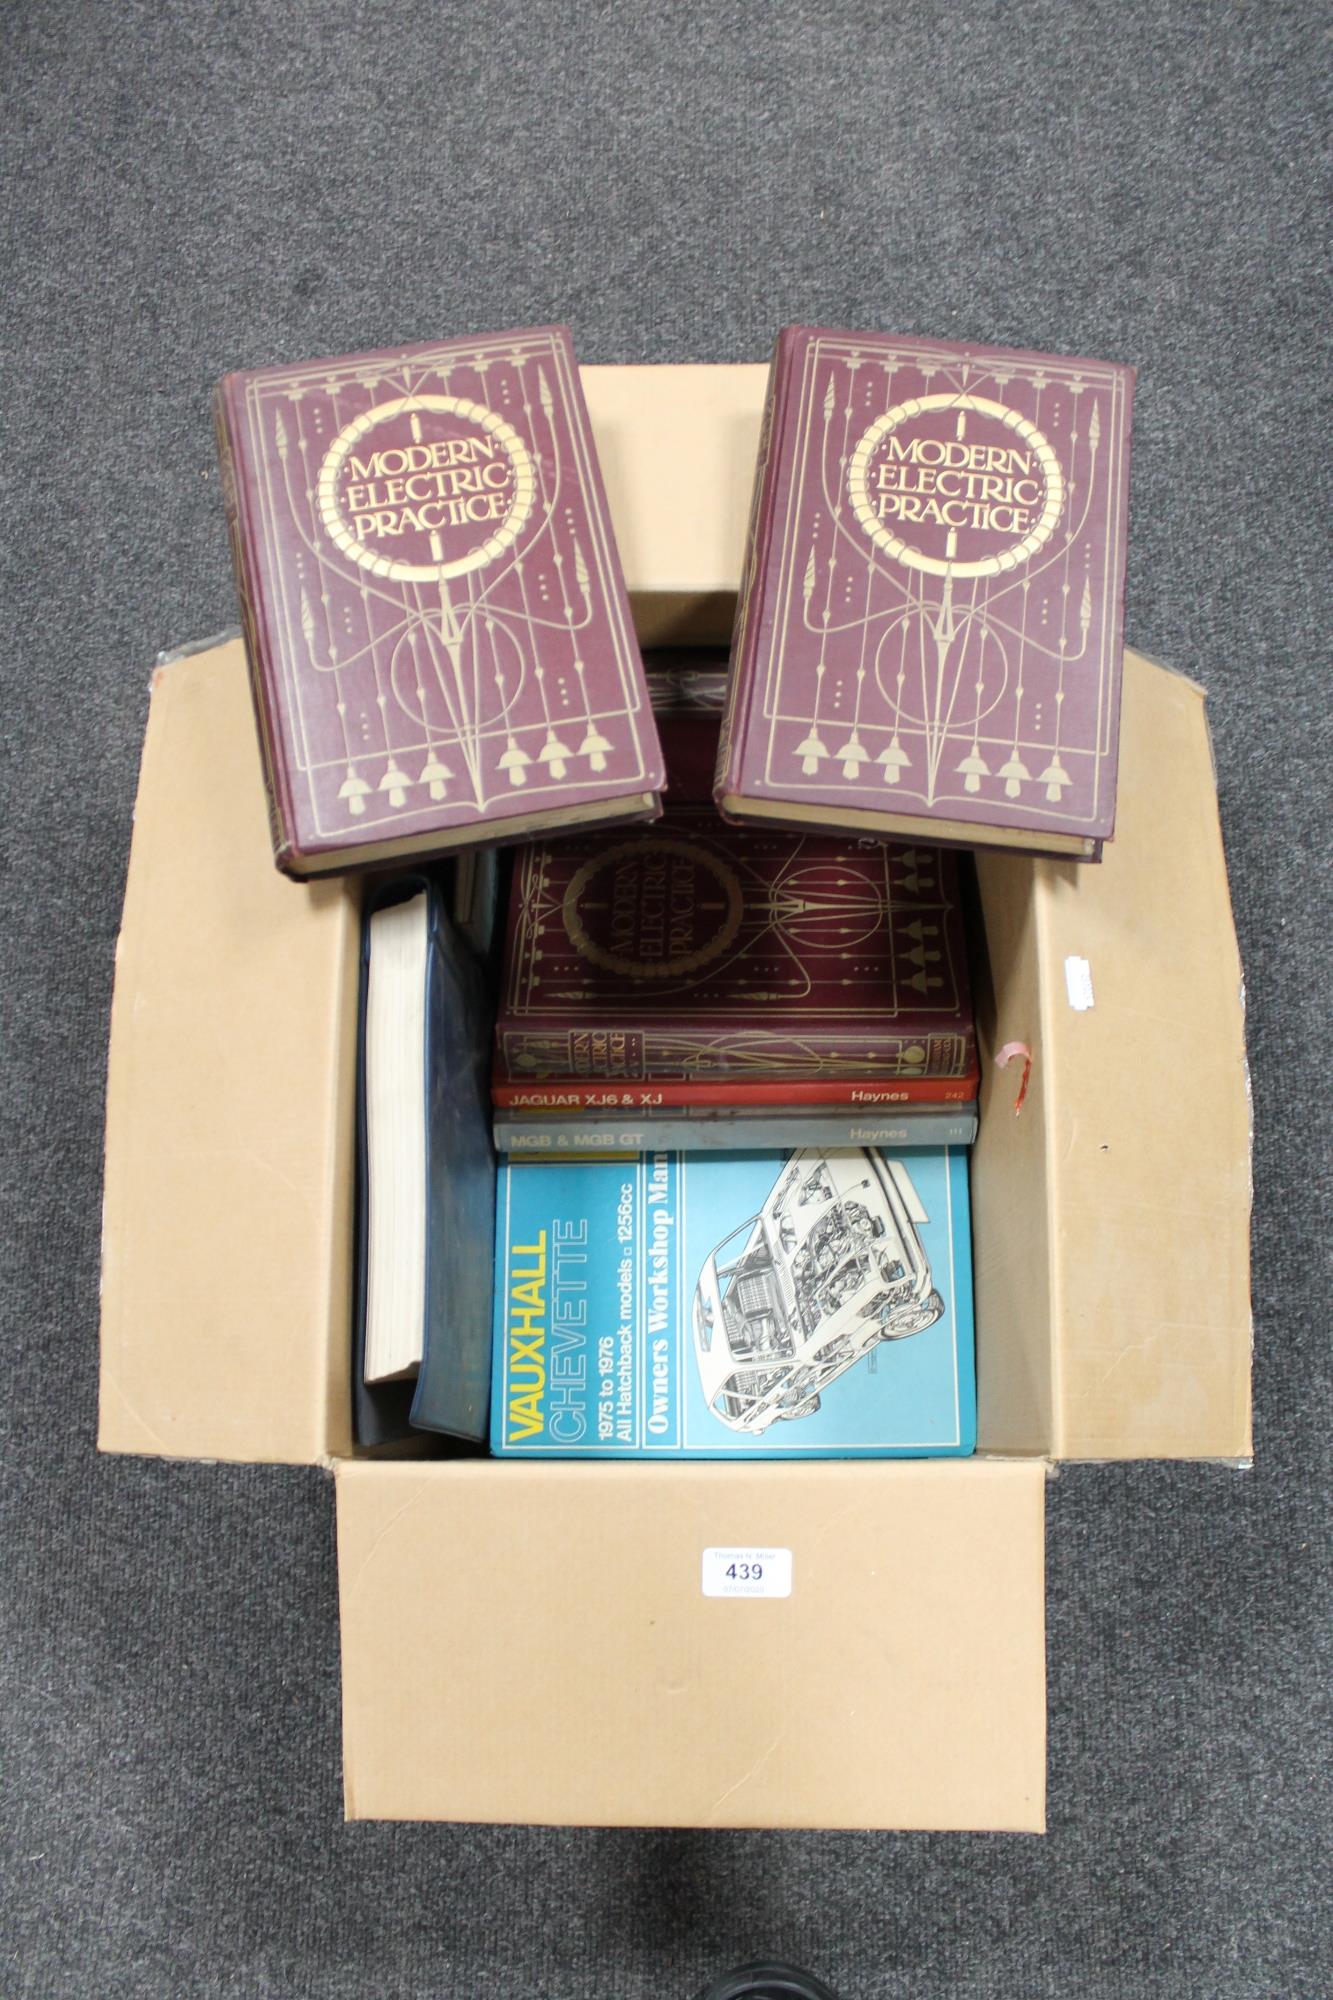 A box of books including Modern Electric Practice volumes,